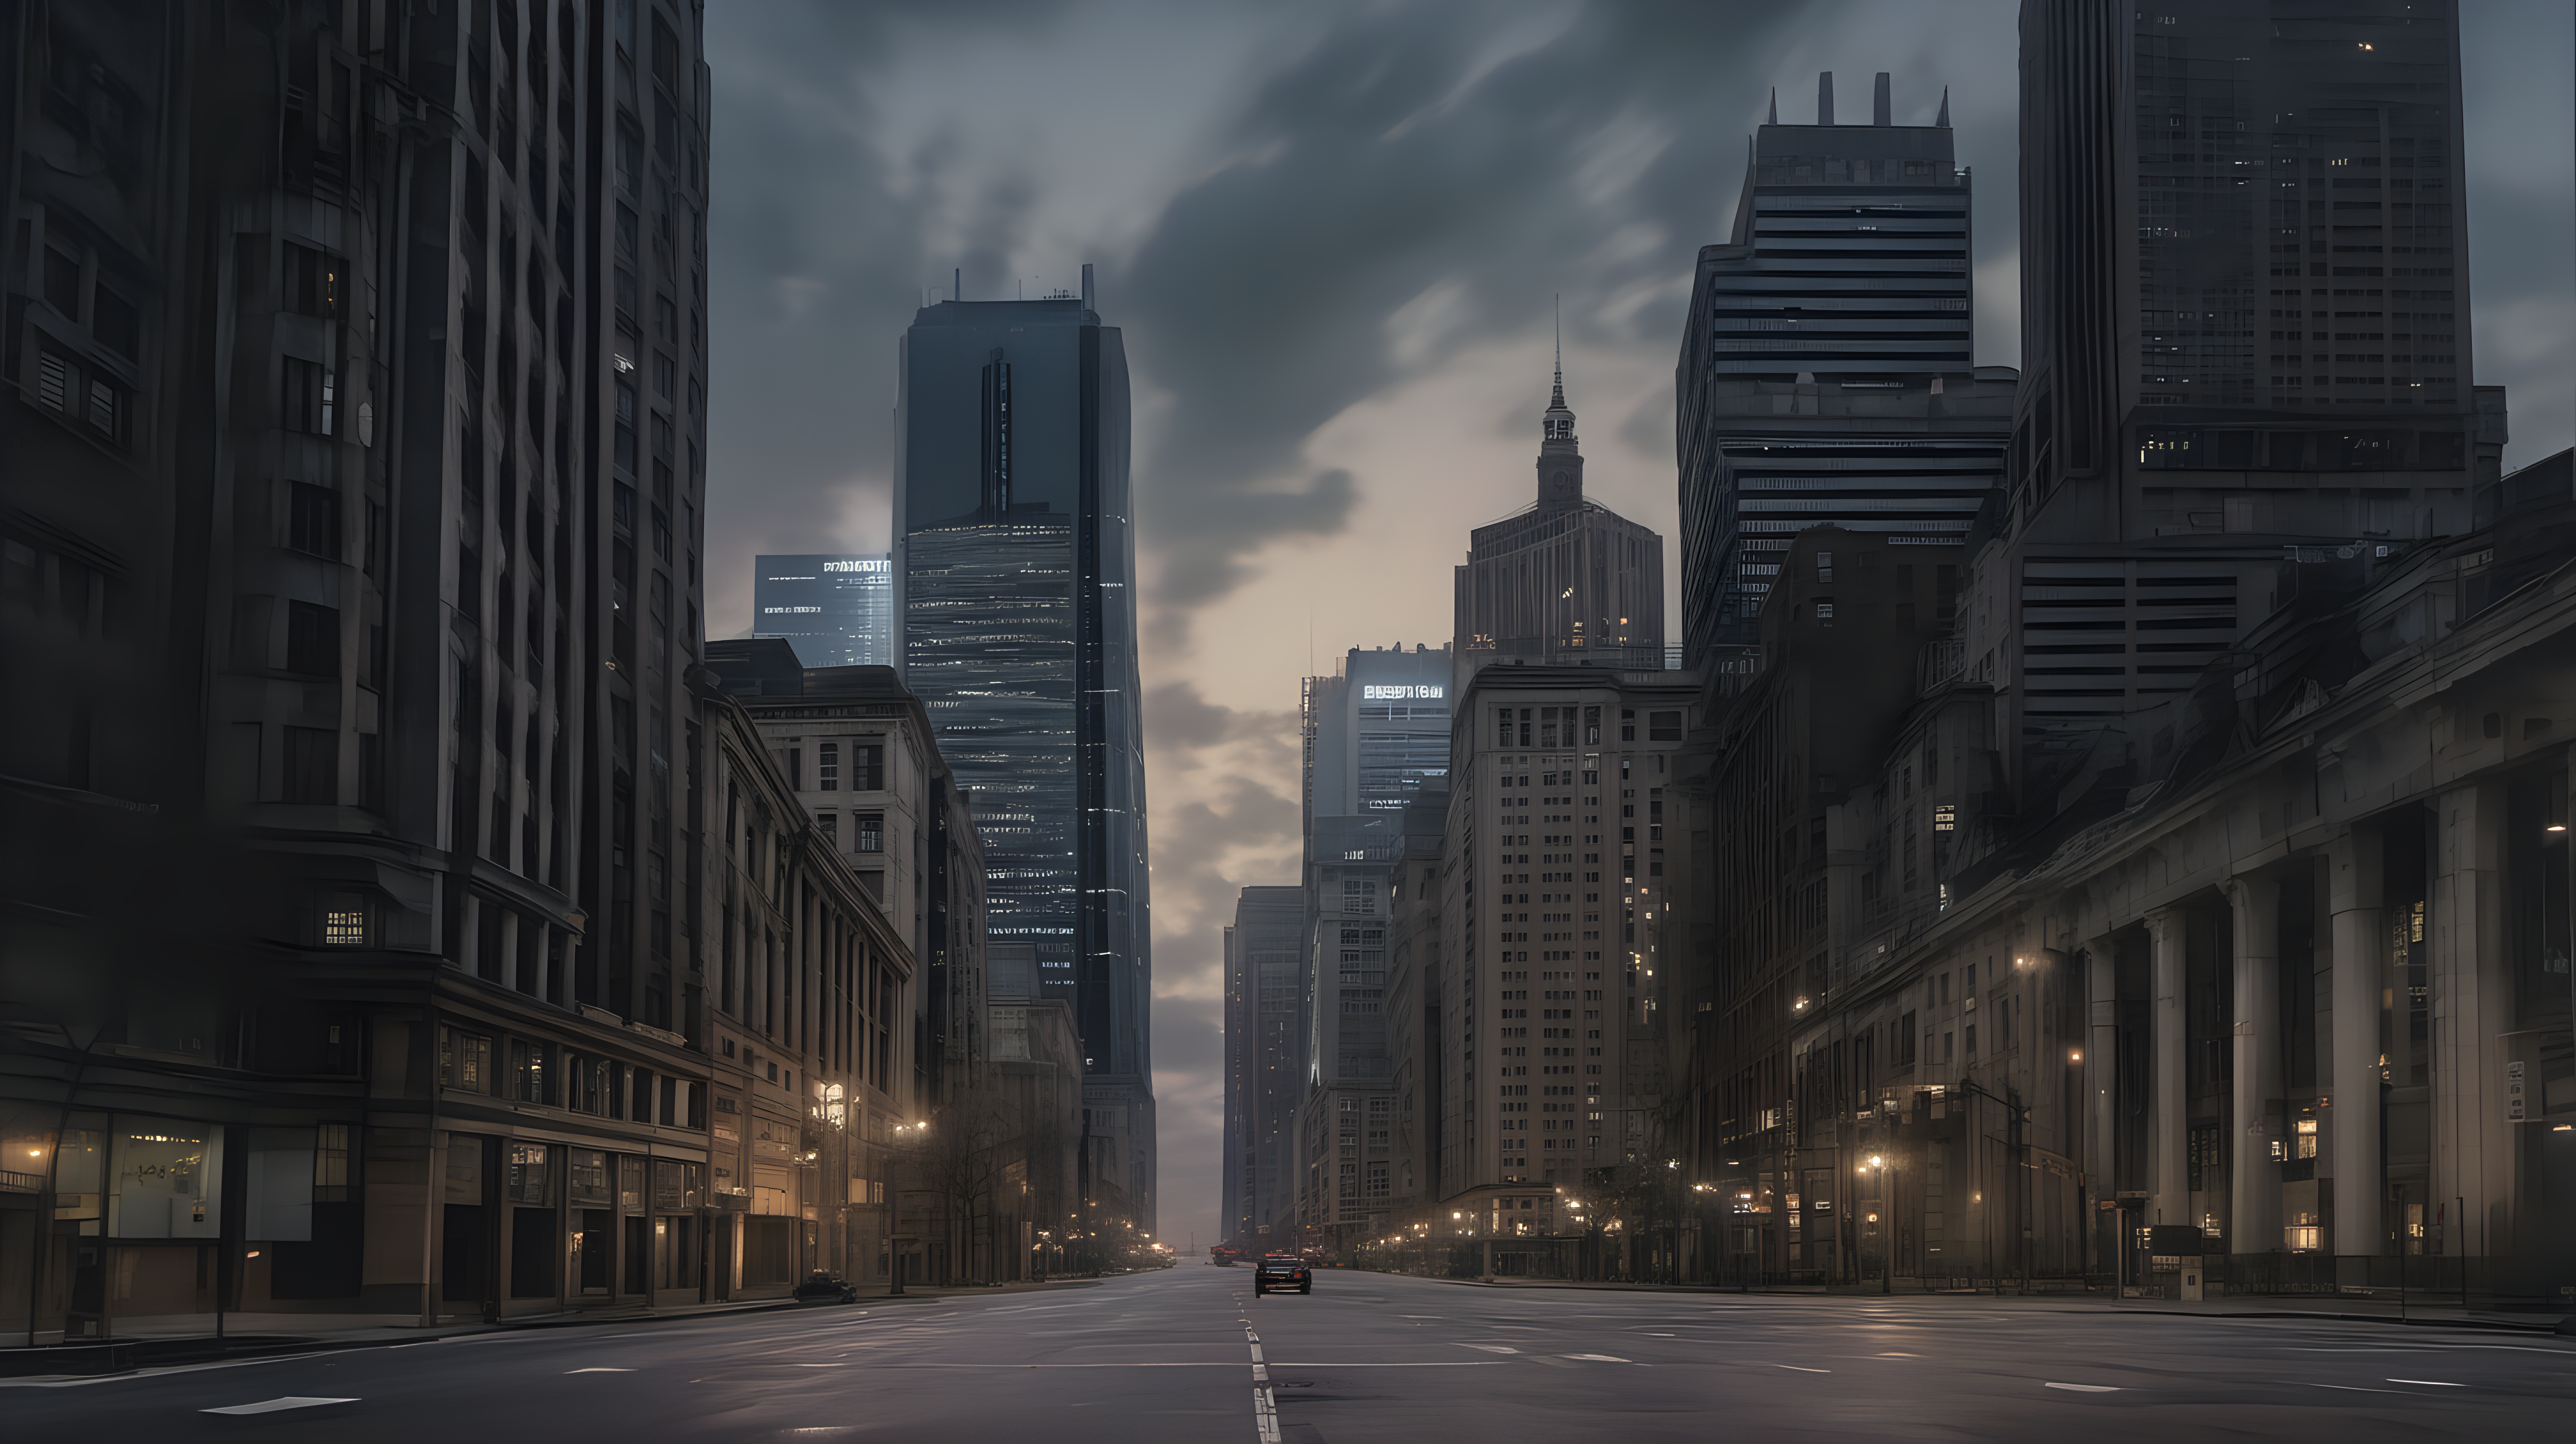 Downtown in a deserted large city at dusk